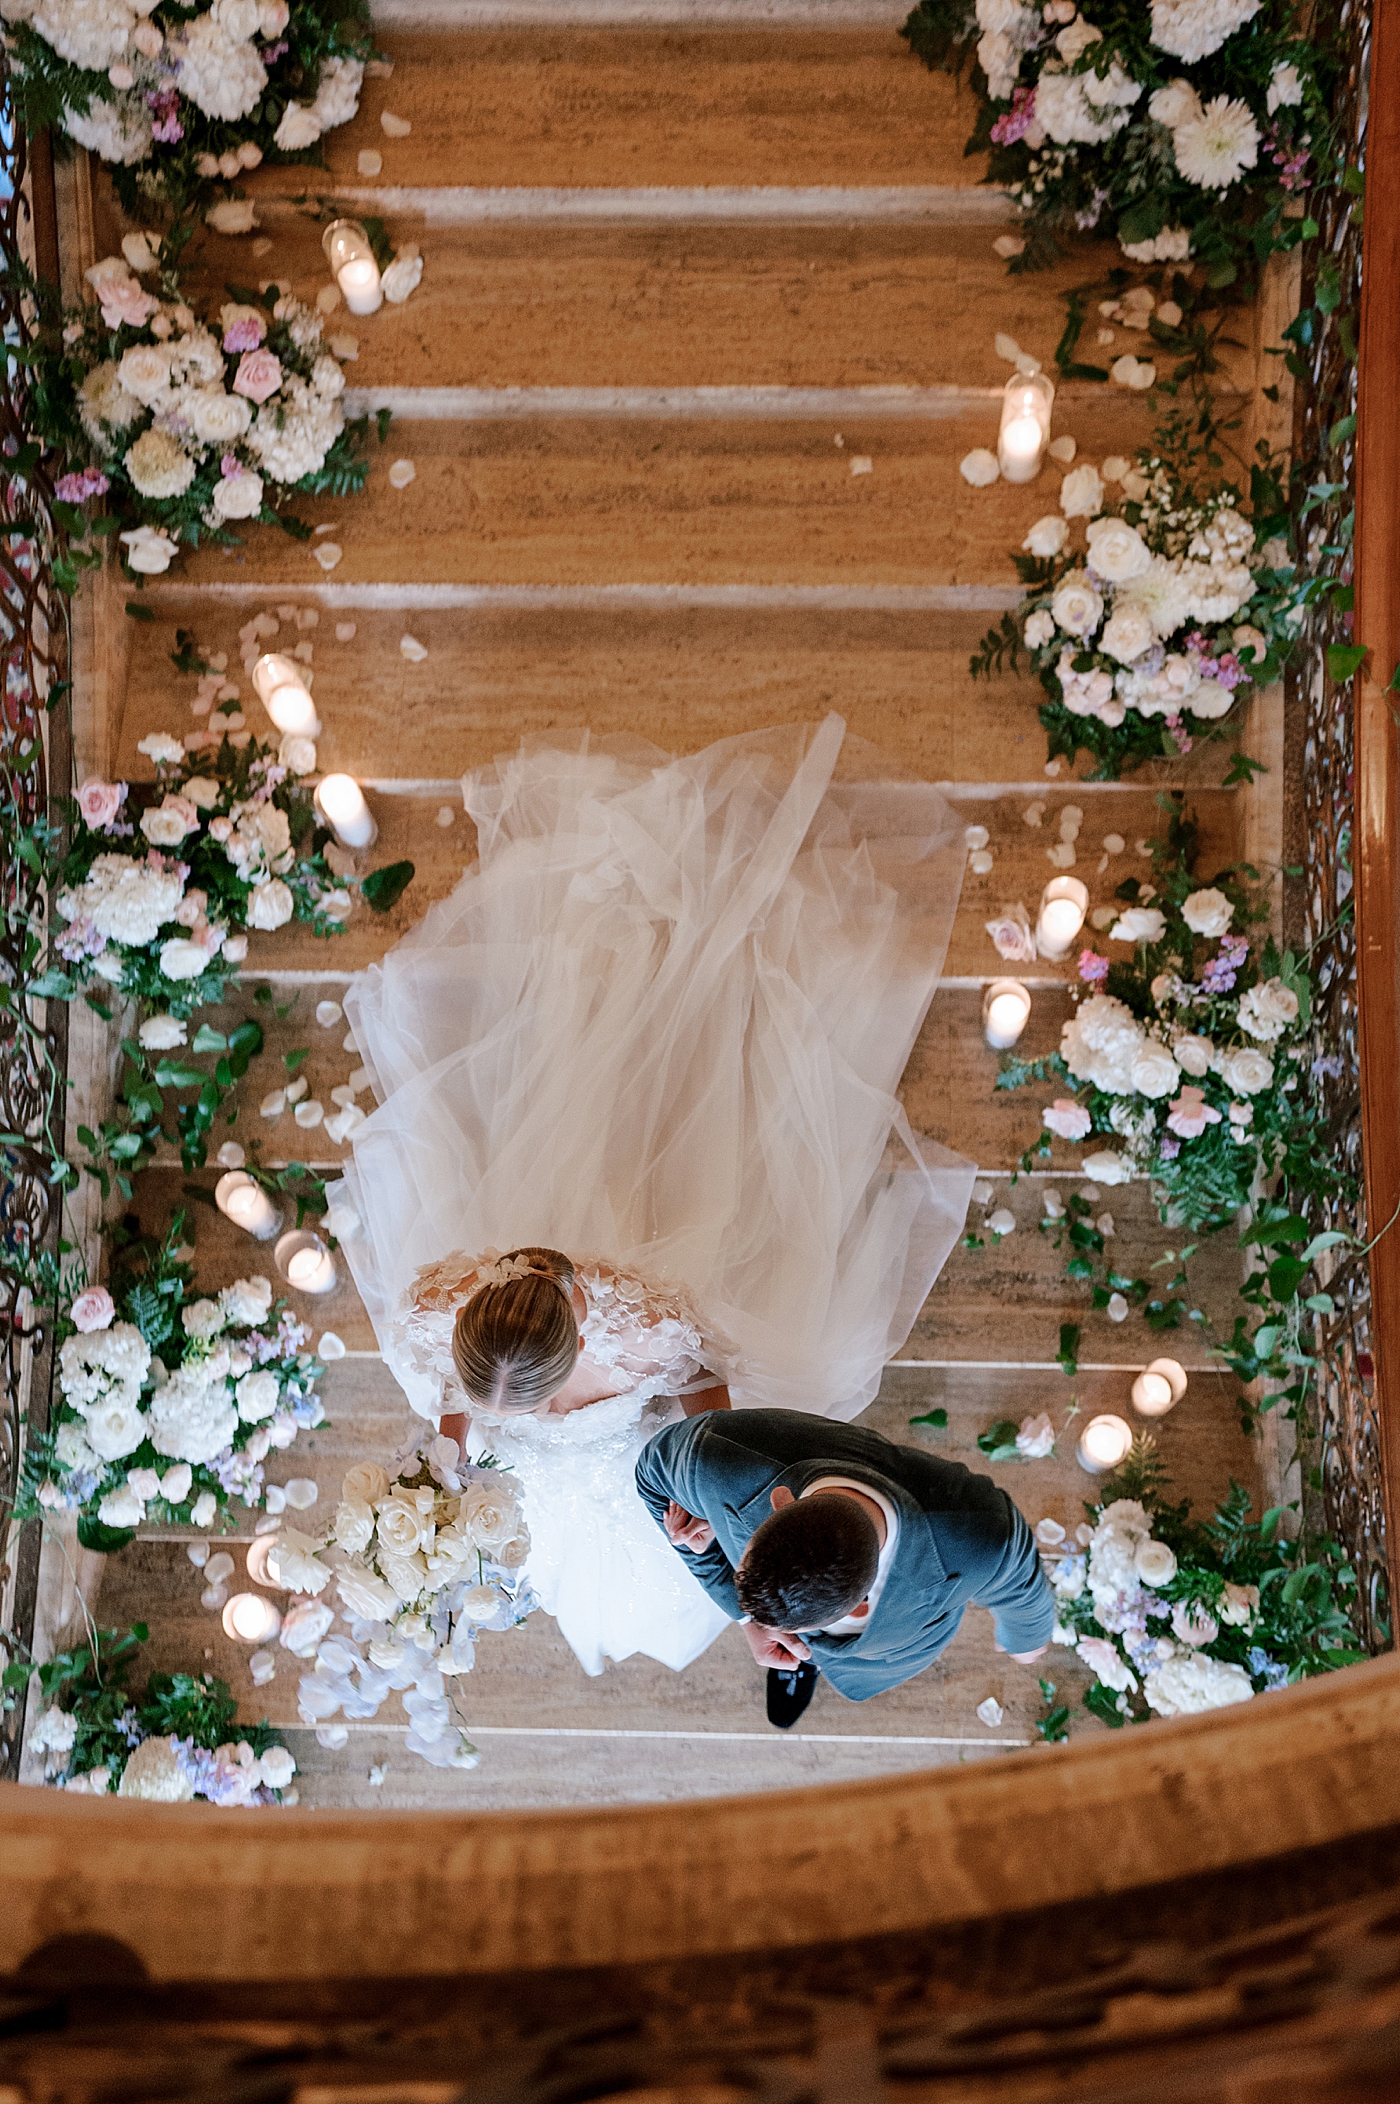 Overhead image of bride and groom walking down the stairs | Image by Hope Helmuth Photography